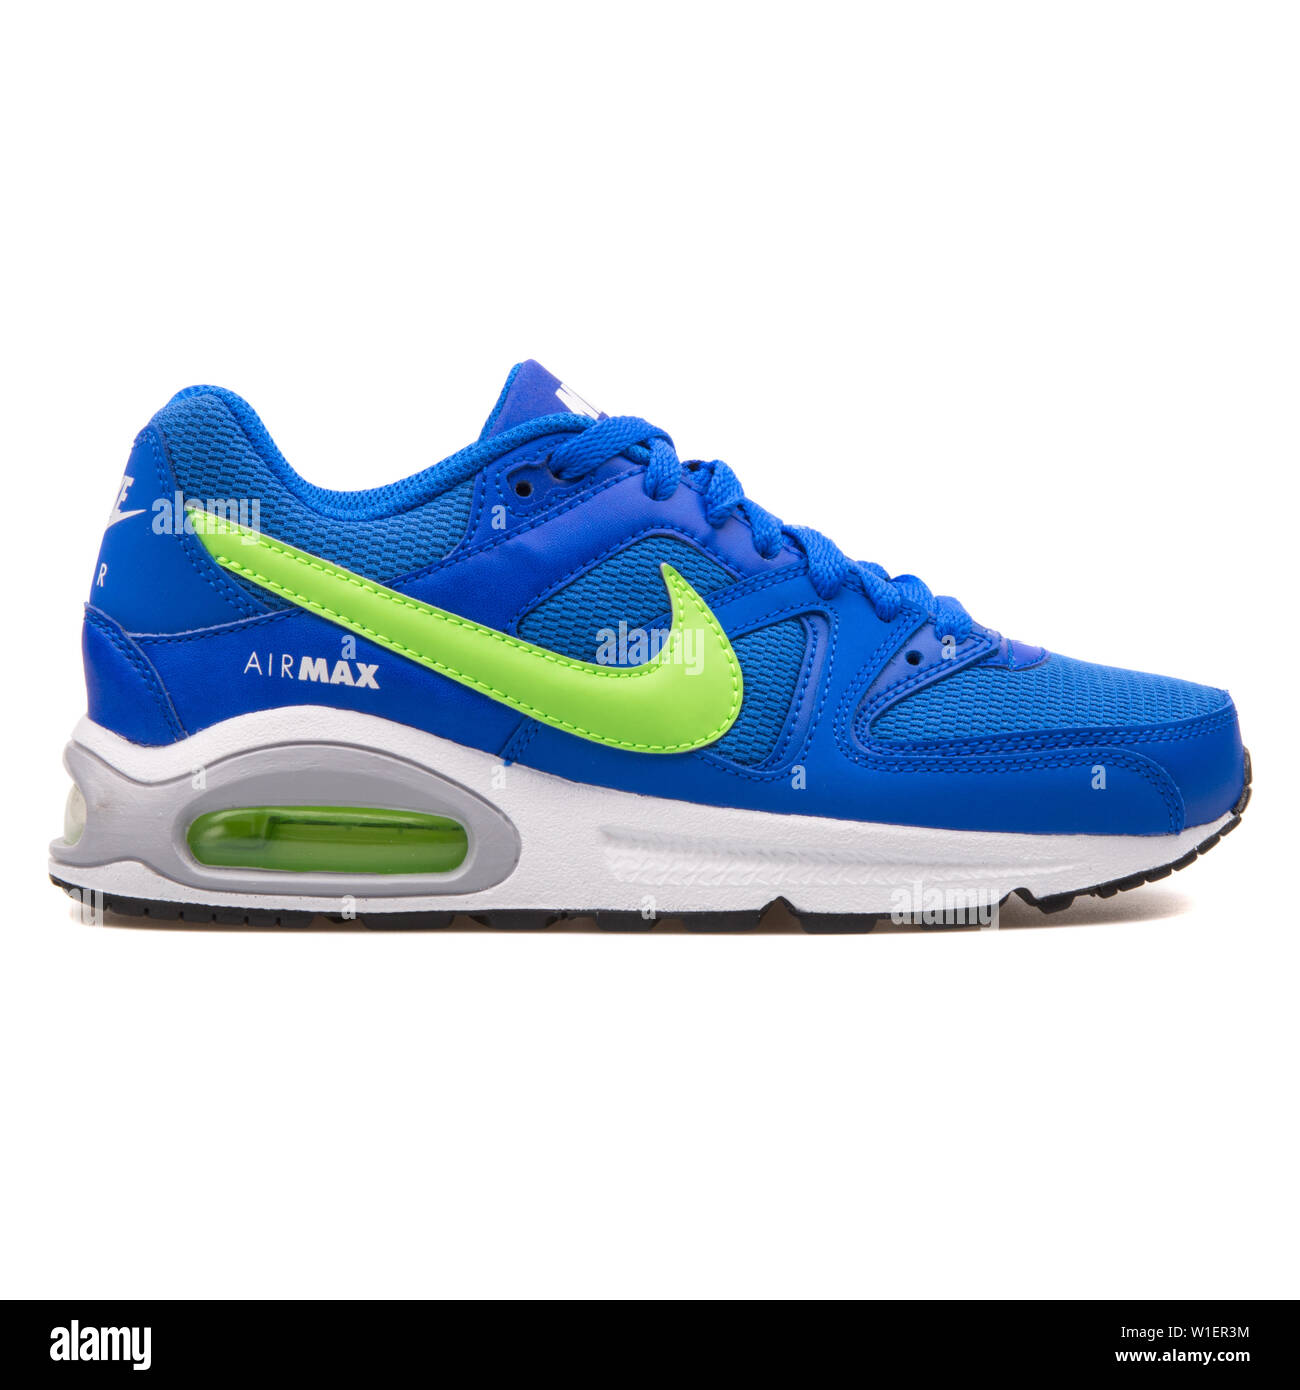 VIENNA, AUSTRIA - AUGUST 10, 2017: Nike Air Max Command blue and green  sneaker on white background Stock Photo - Alamy